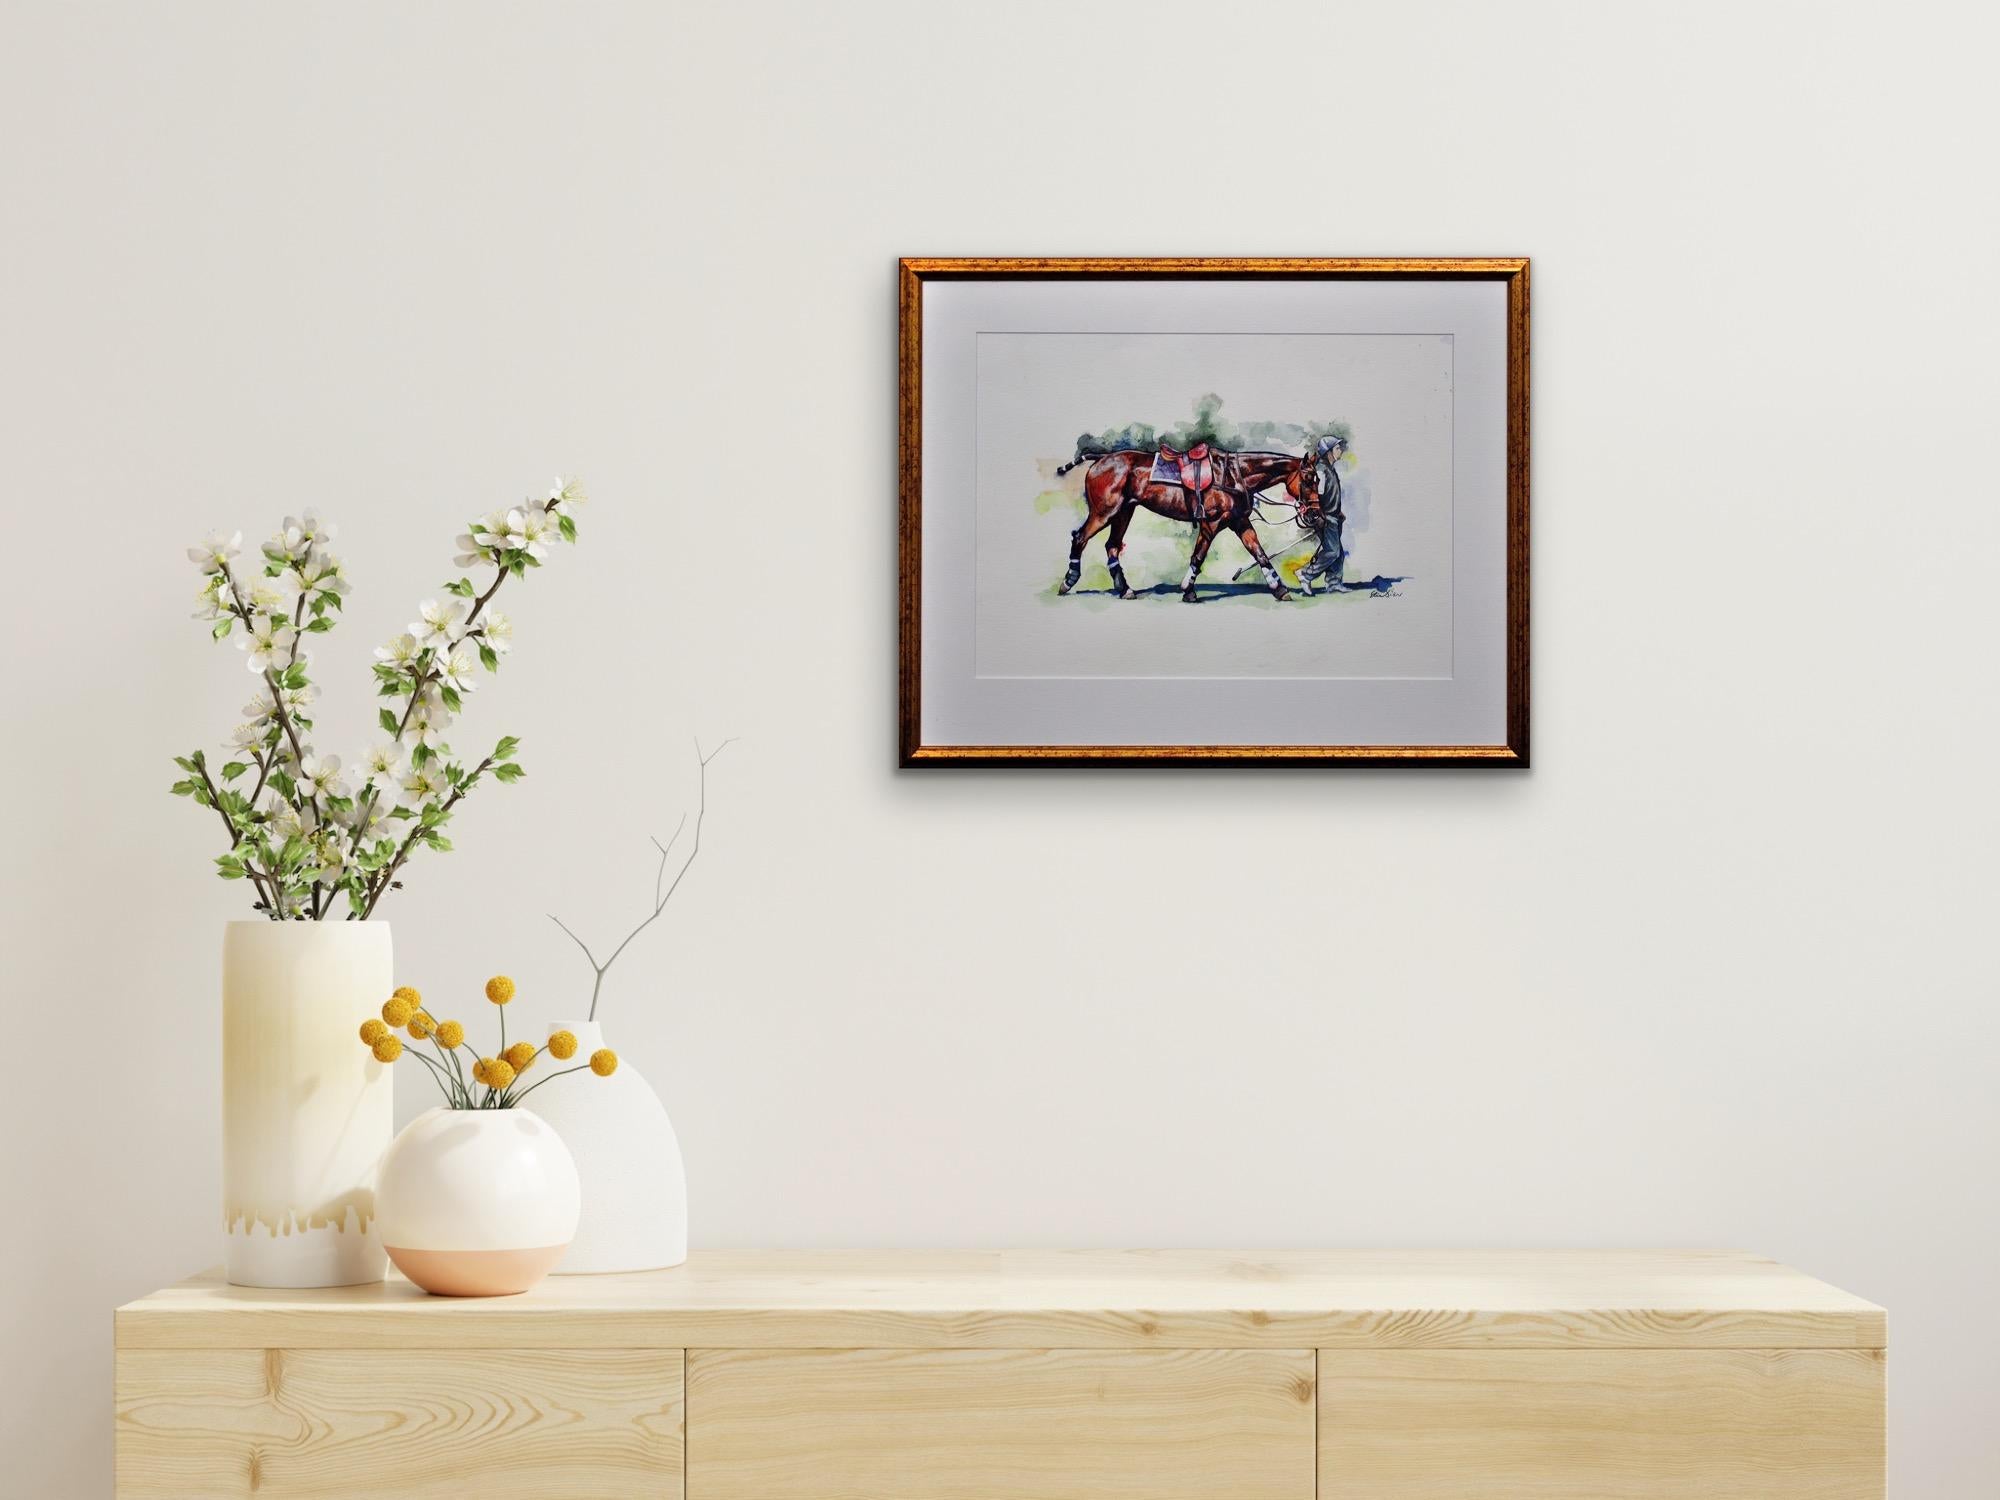 Polo Match, Cirencester, Player Leading Pony. Cotswolds. Framed Watercolor. For Sale 15